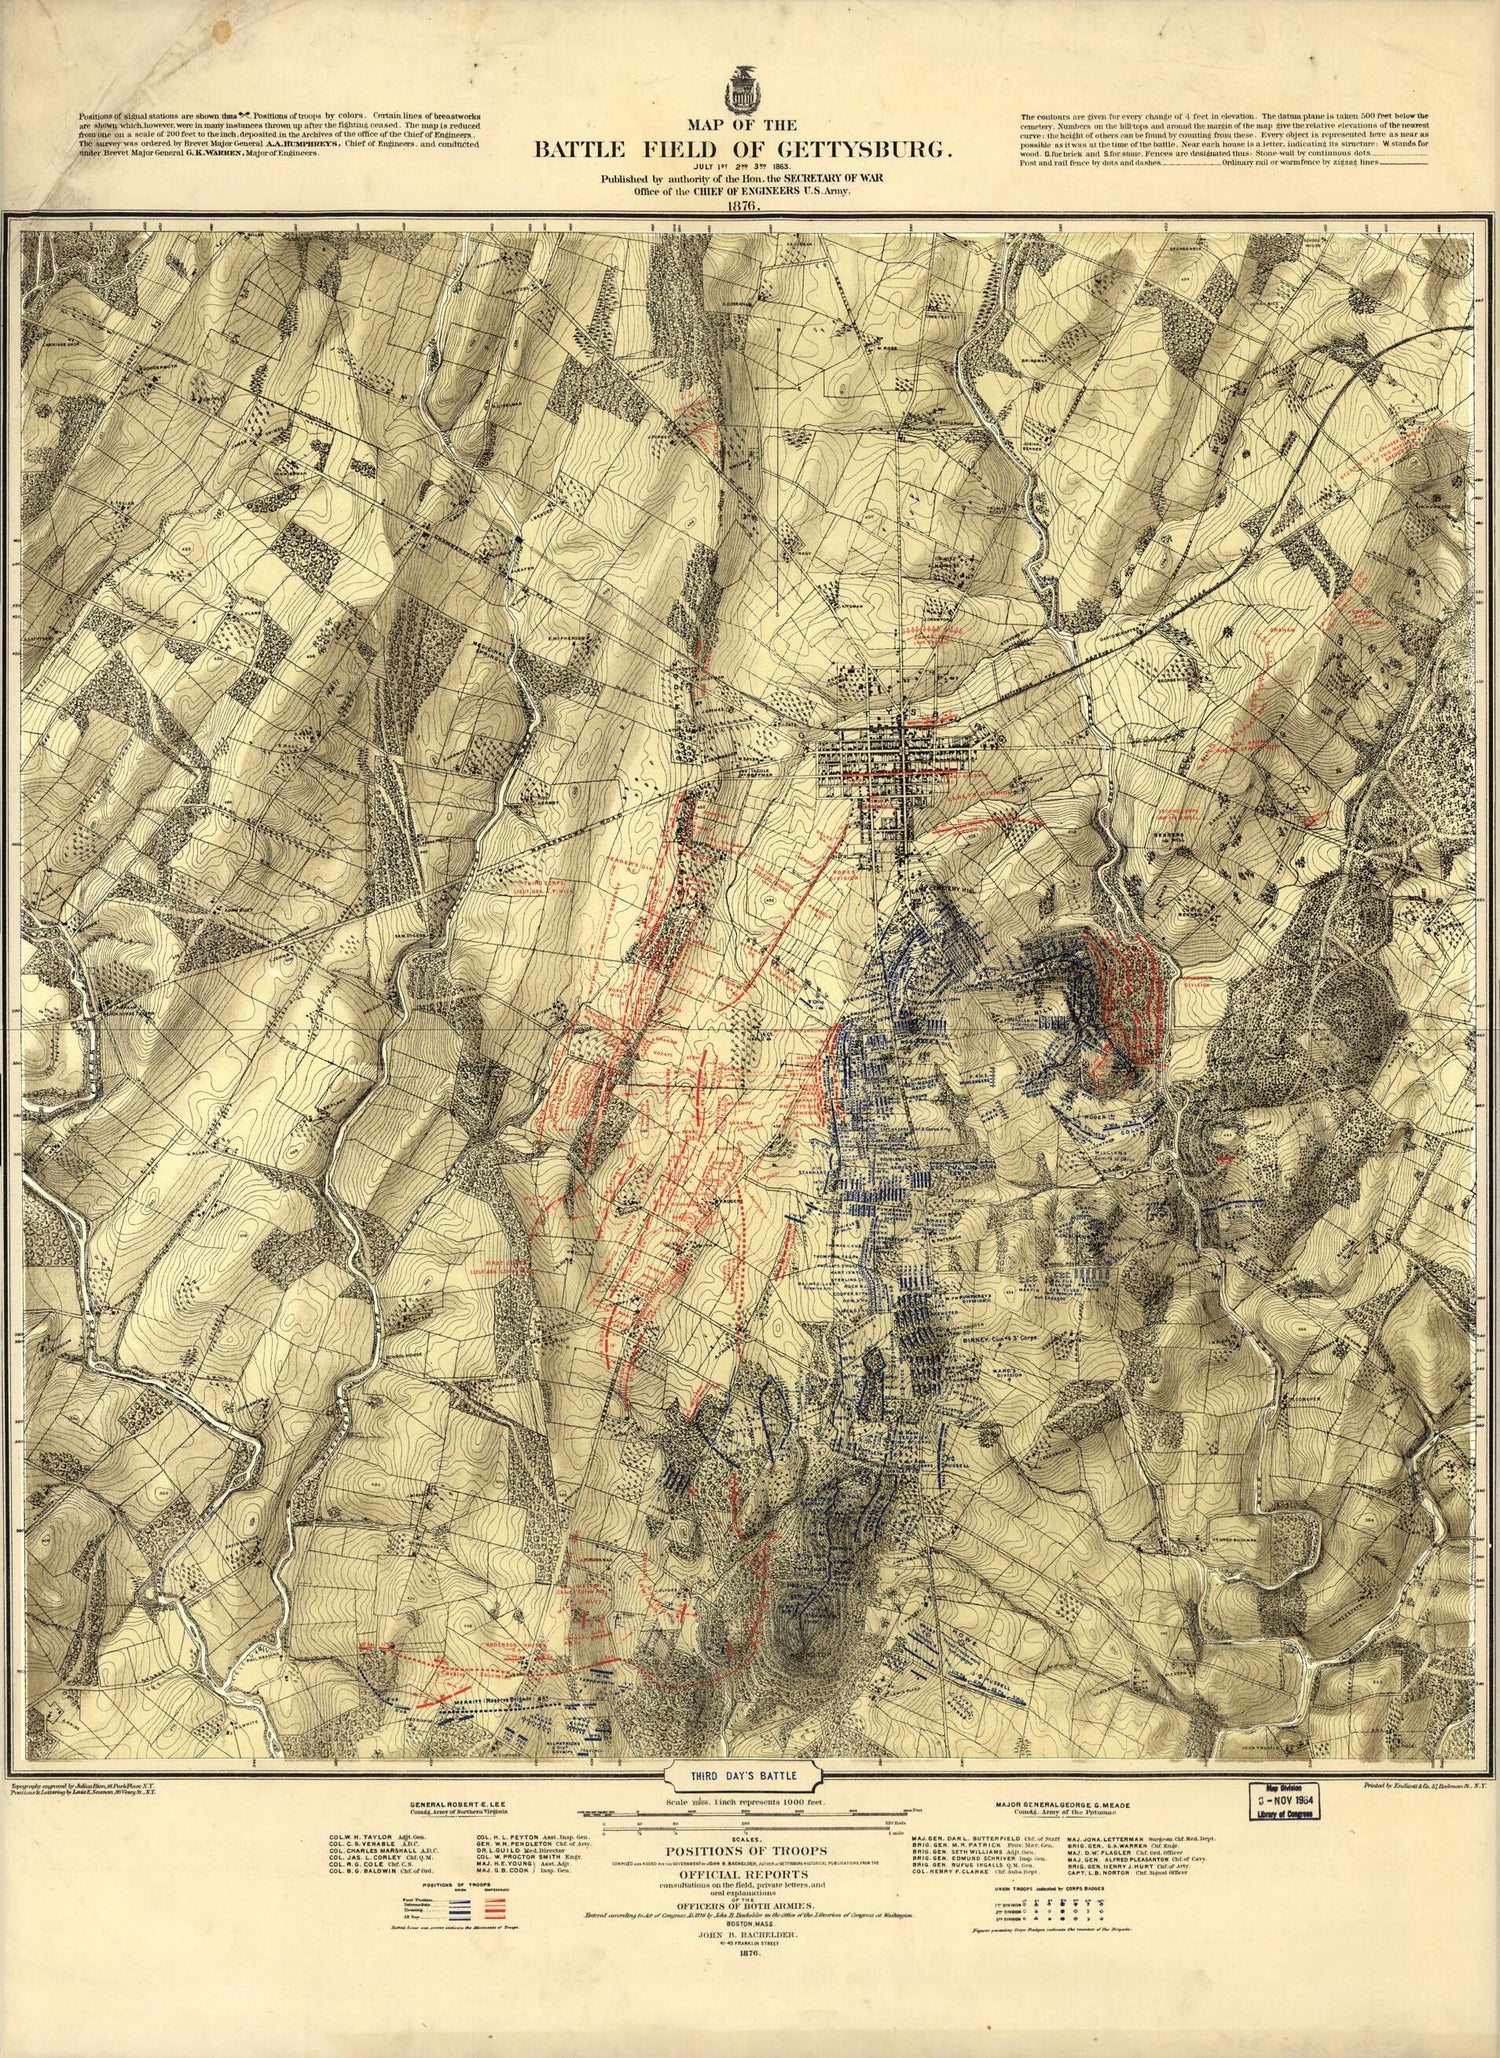 This old map of Map of the Battle Field of Gettysburg. July 1st, 2nd, 3rd, 1863 from 1879 was created by John B. (John Badger) Bachelder in 1879